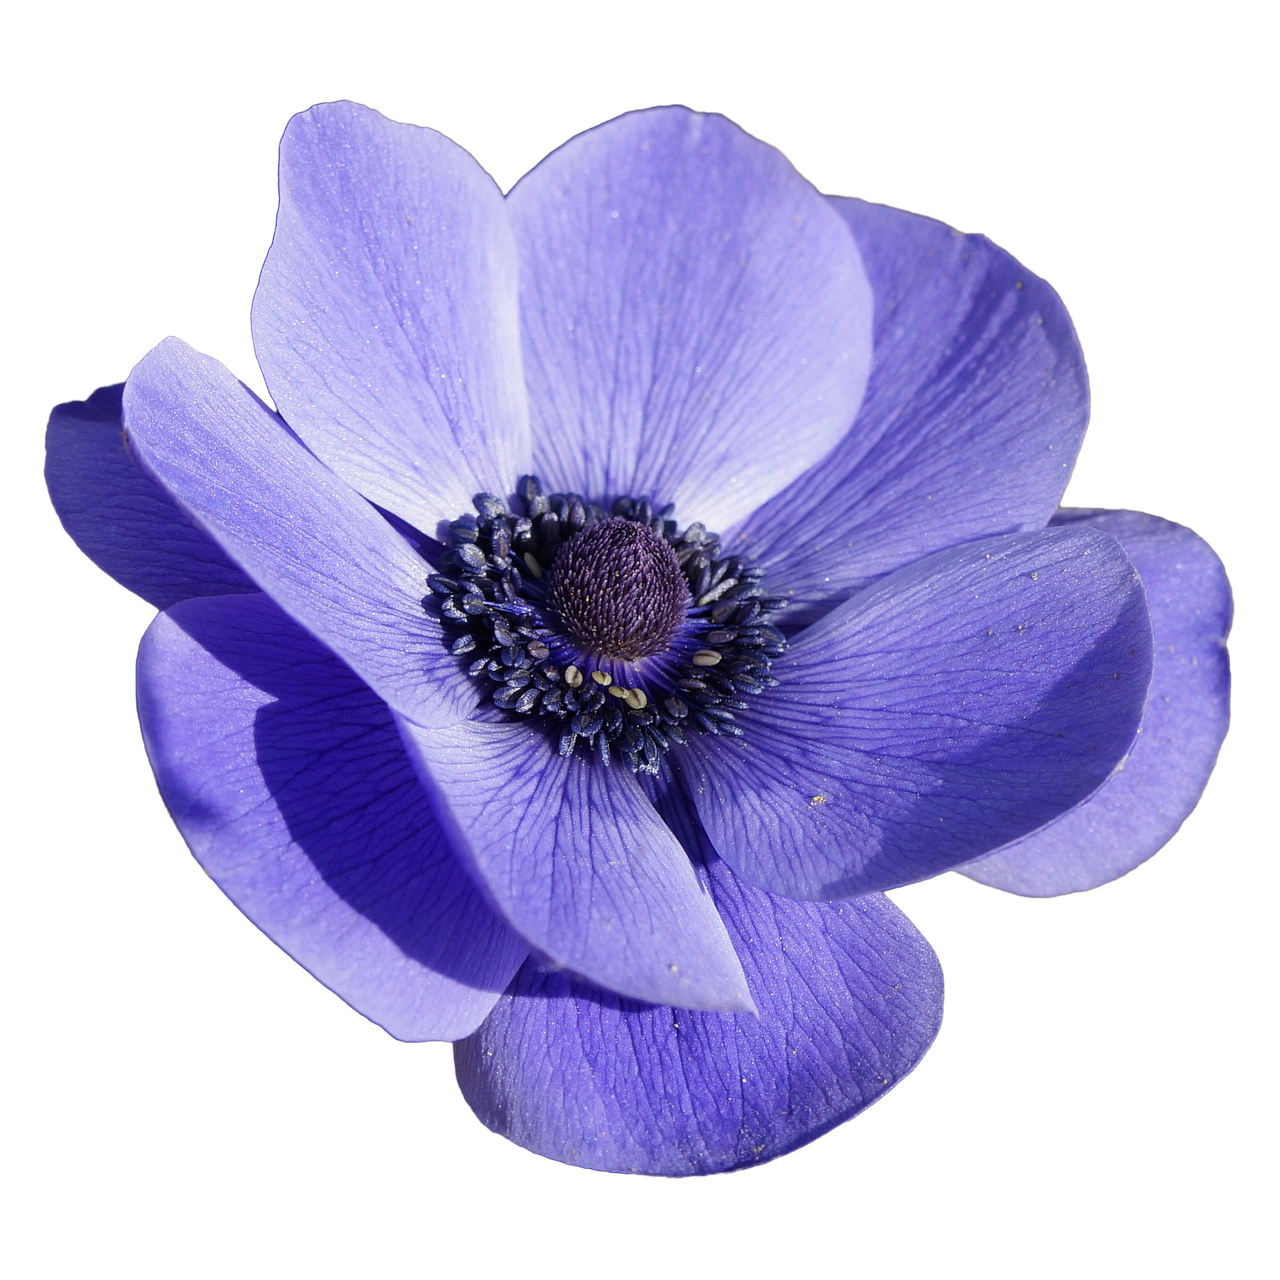 a close up of a purple flower on a black background, anemones, blue and black color scheme)), centered in portrait, various posed